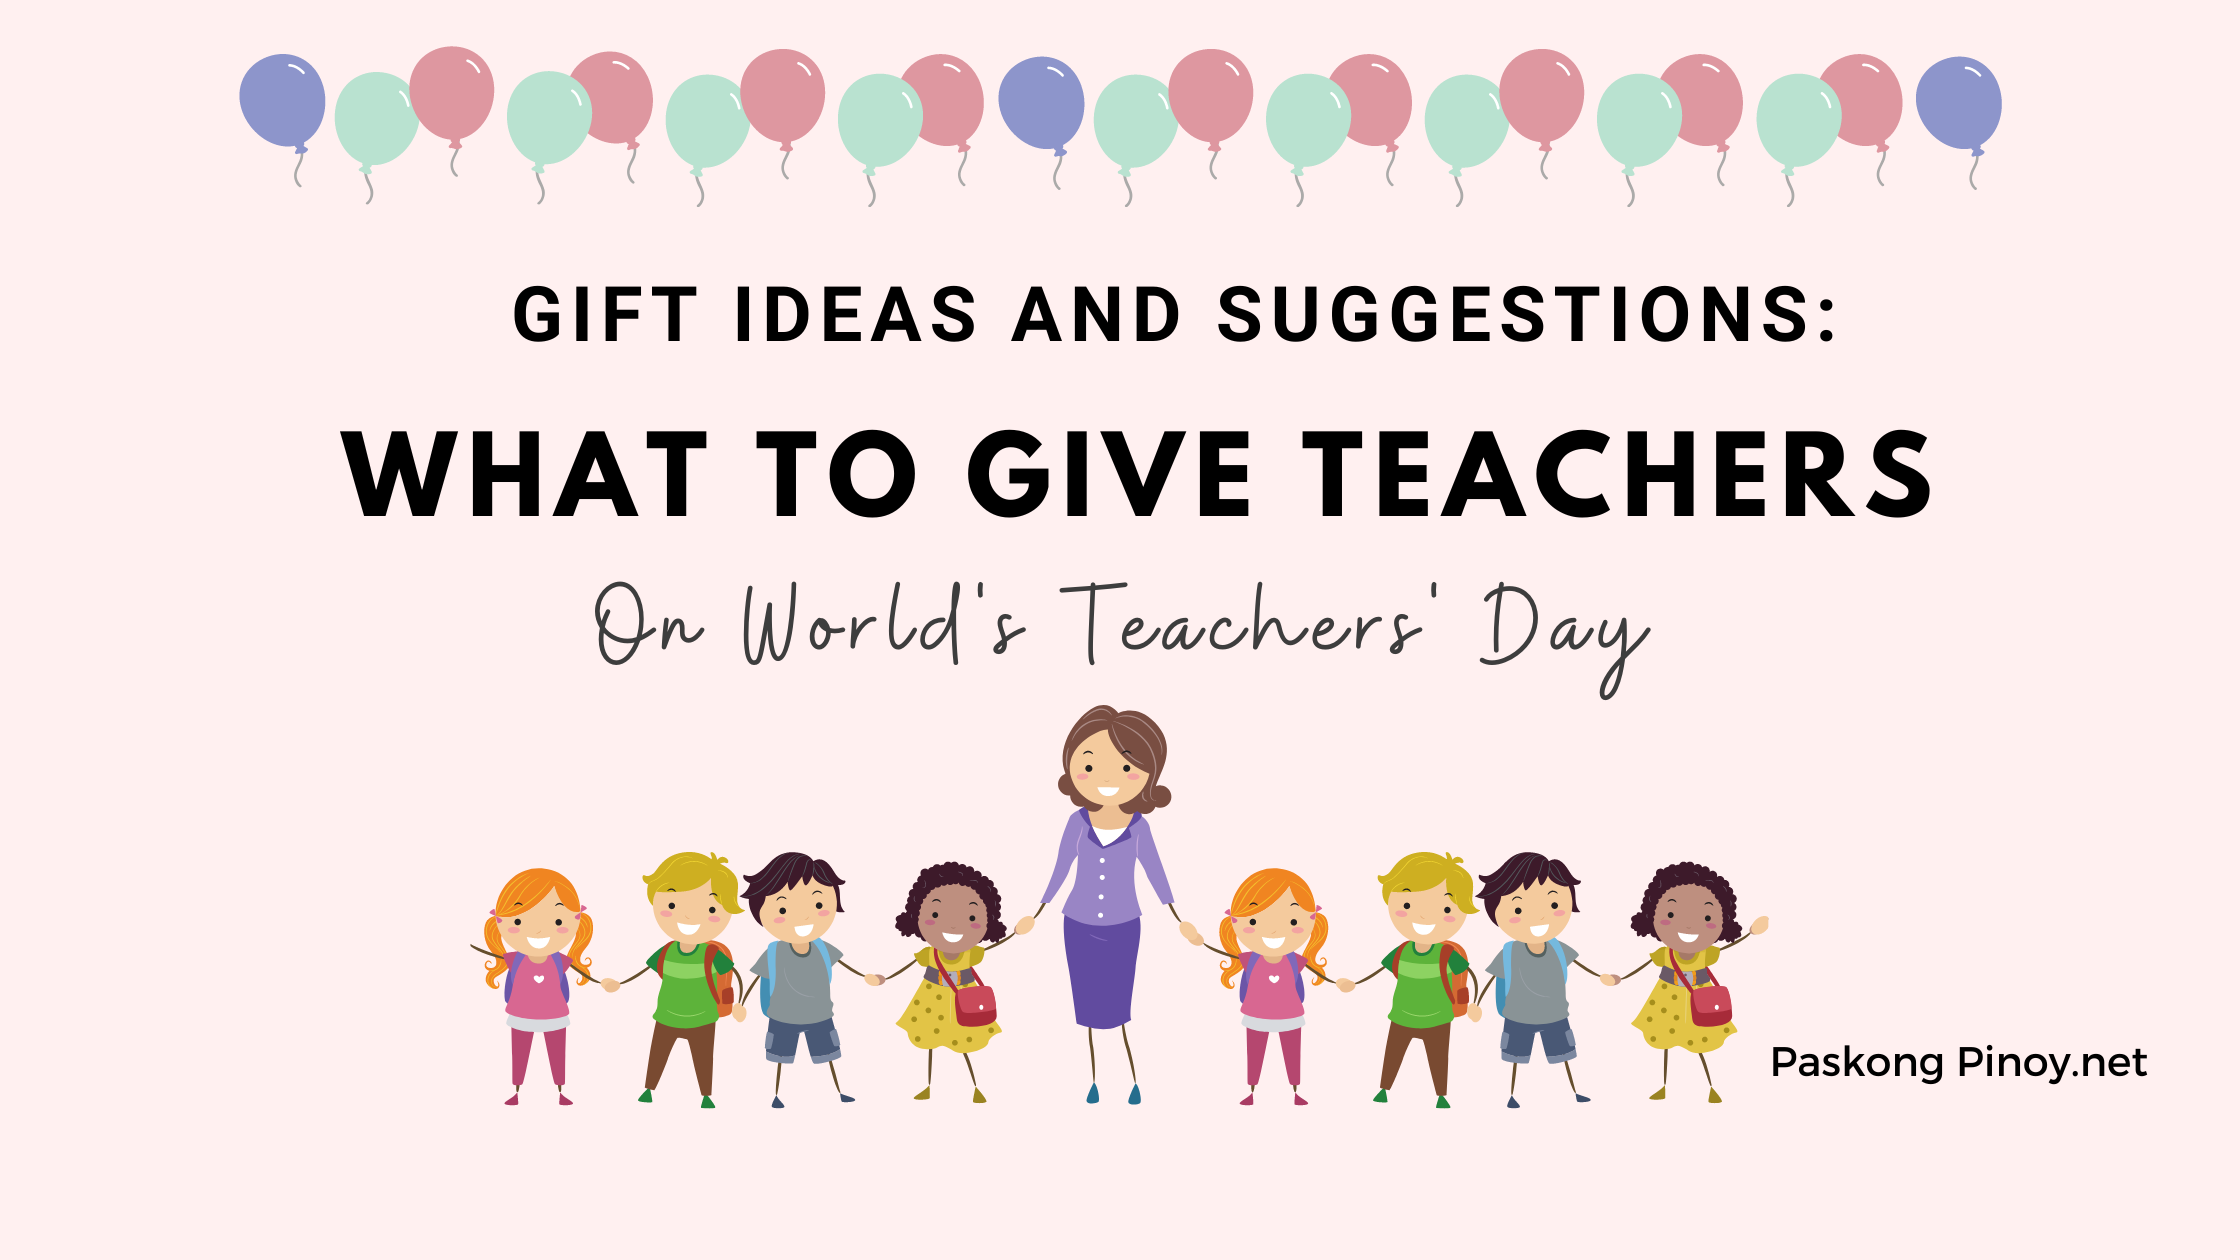 Gifts for teachers suggestions